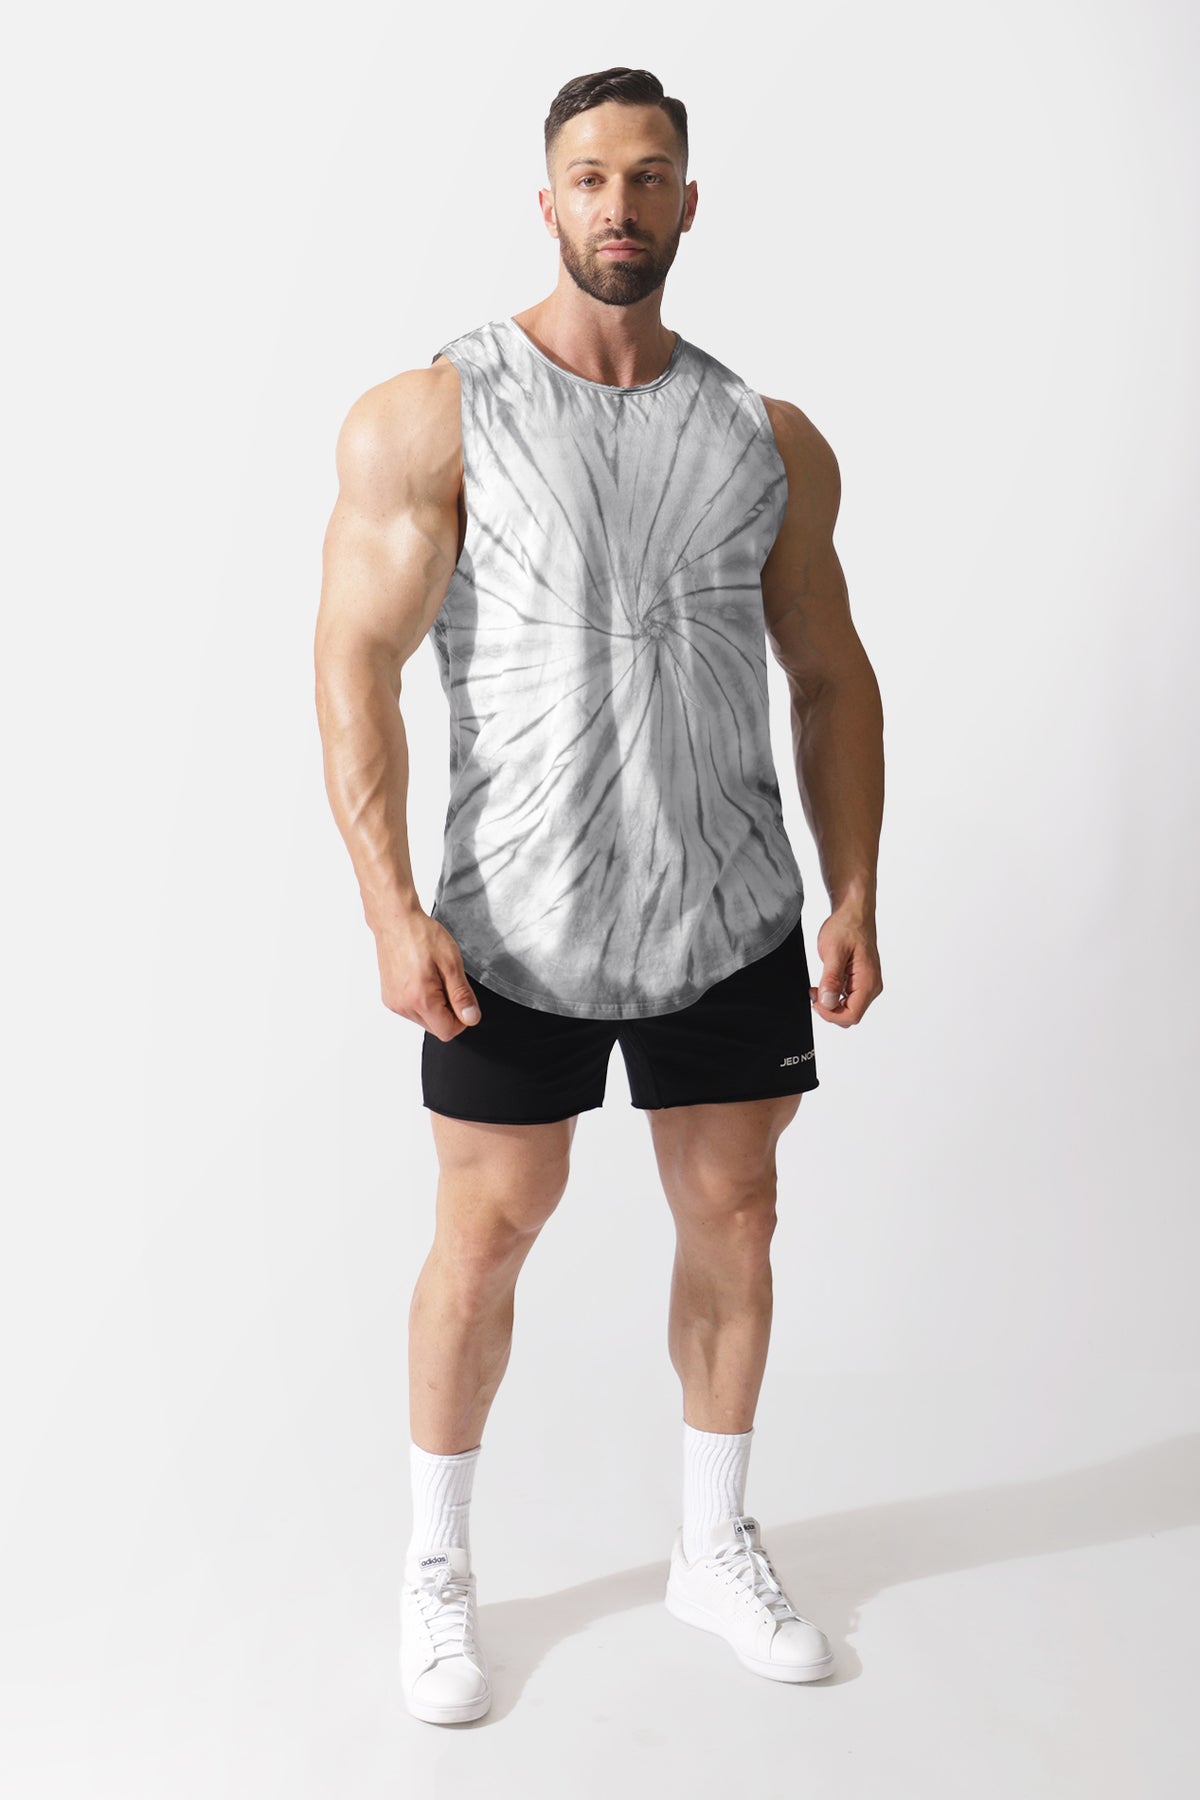 Luxe Flex Training Muscle Tee - Vintage Washed Gray